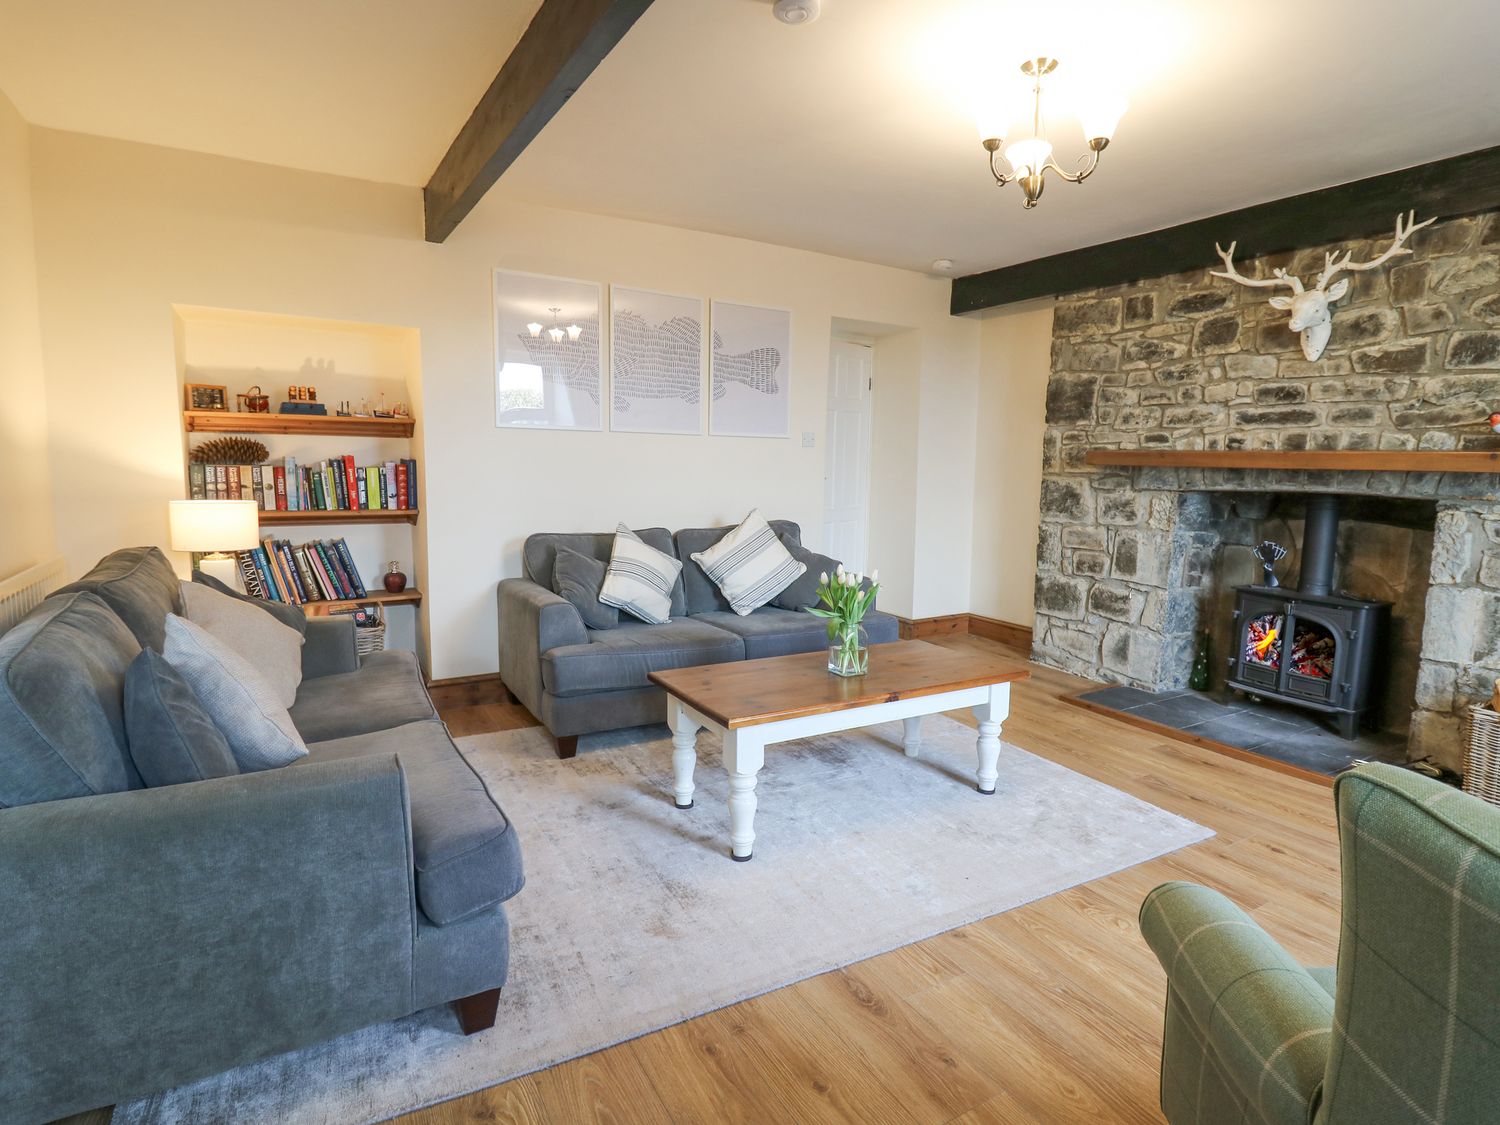 Towyn Hall, New Quay, Sir Ceredigion. Detached. Woodburning stove. Enclosed patio with garden. WiFi.